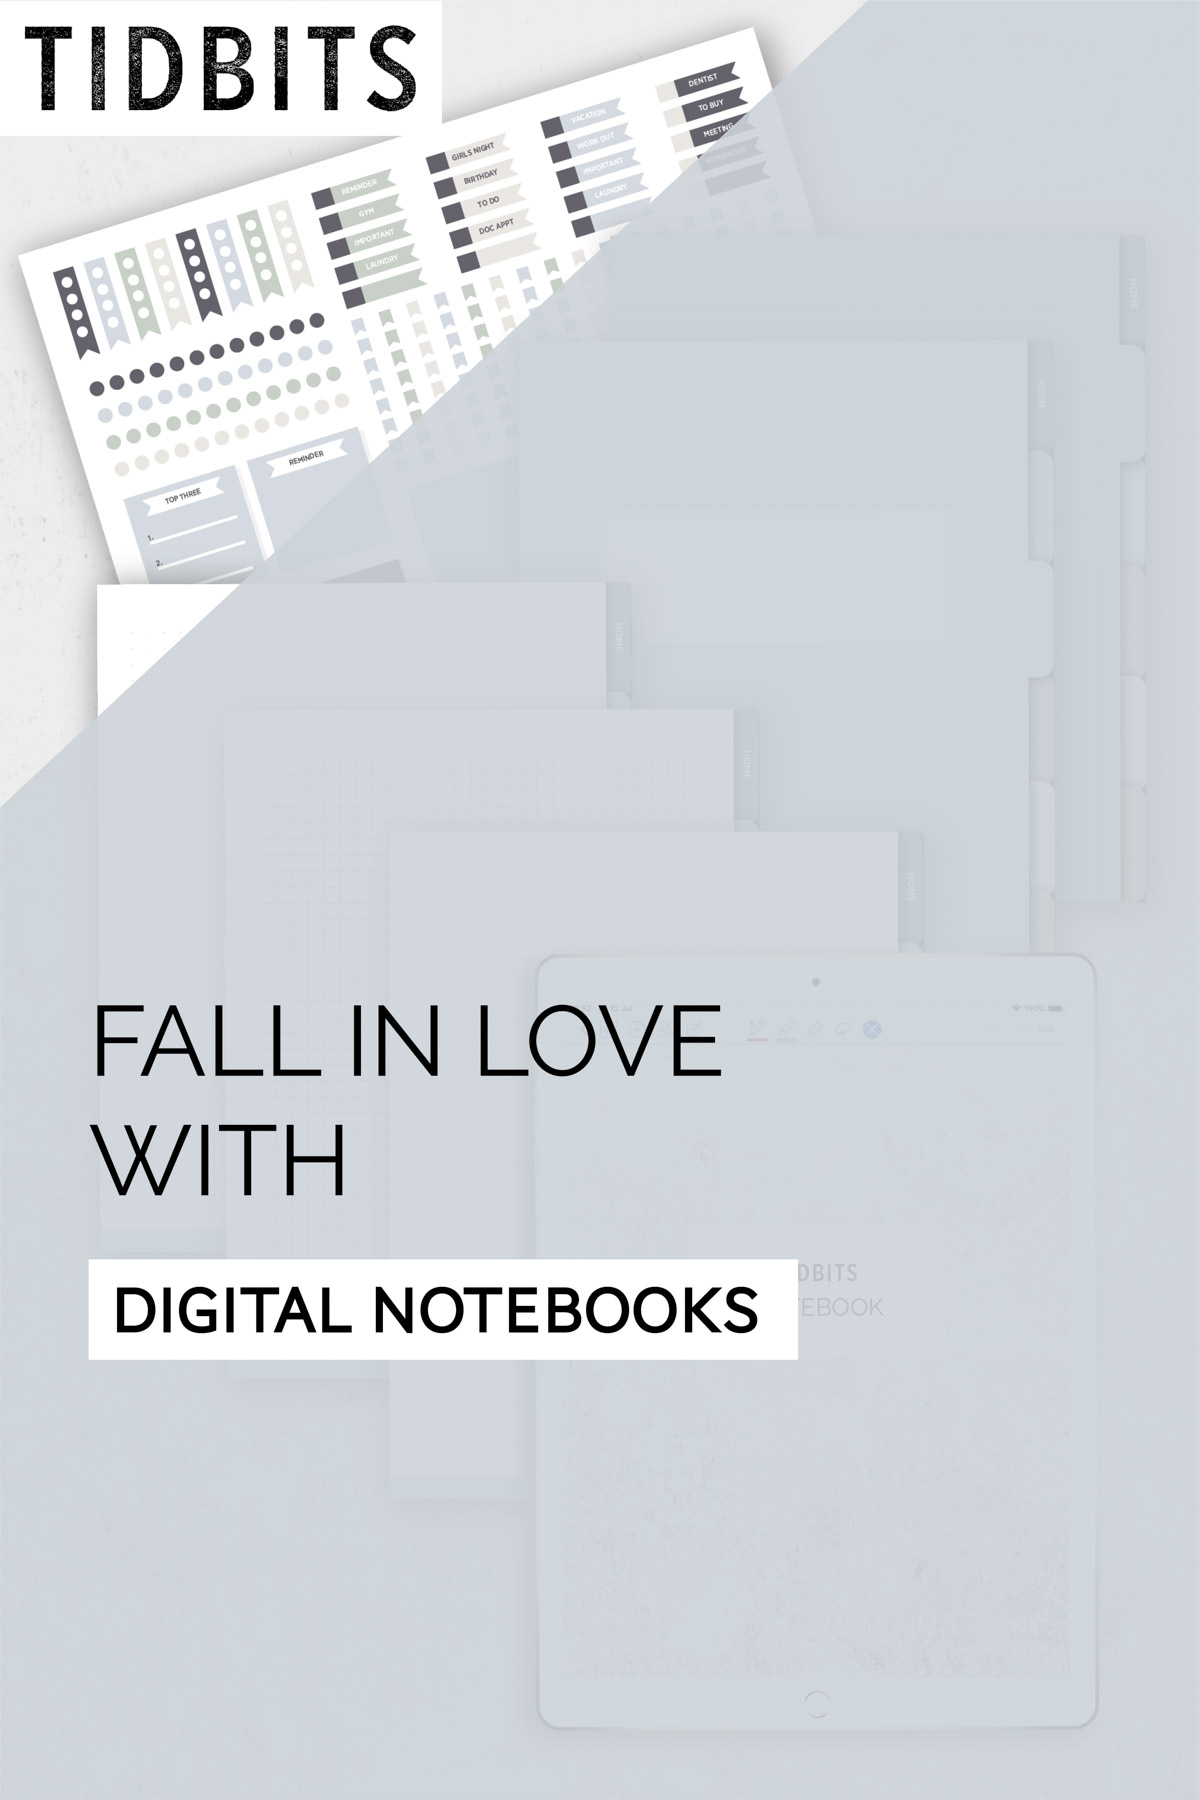 Fall in love with digital notebooks!